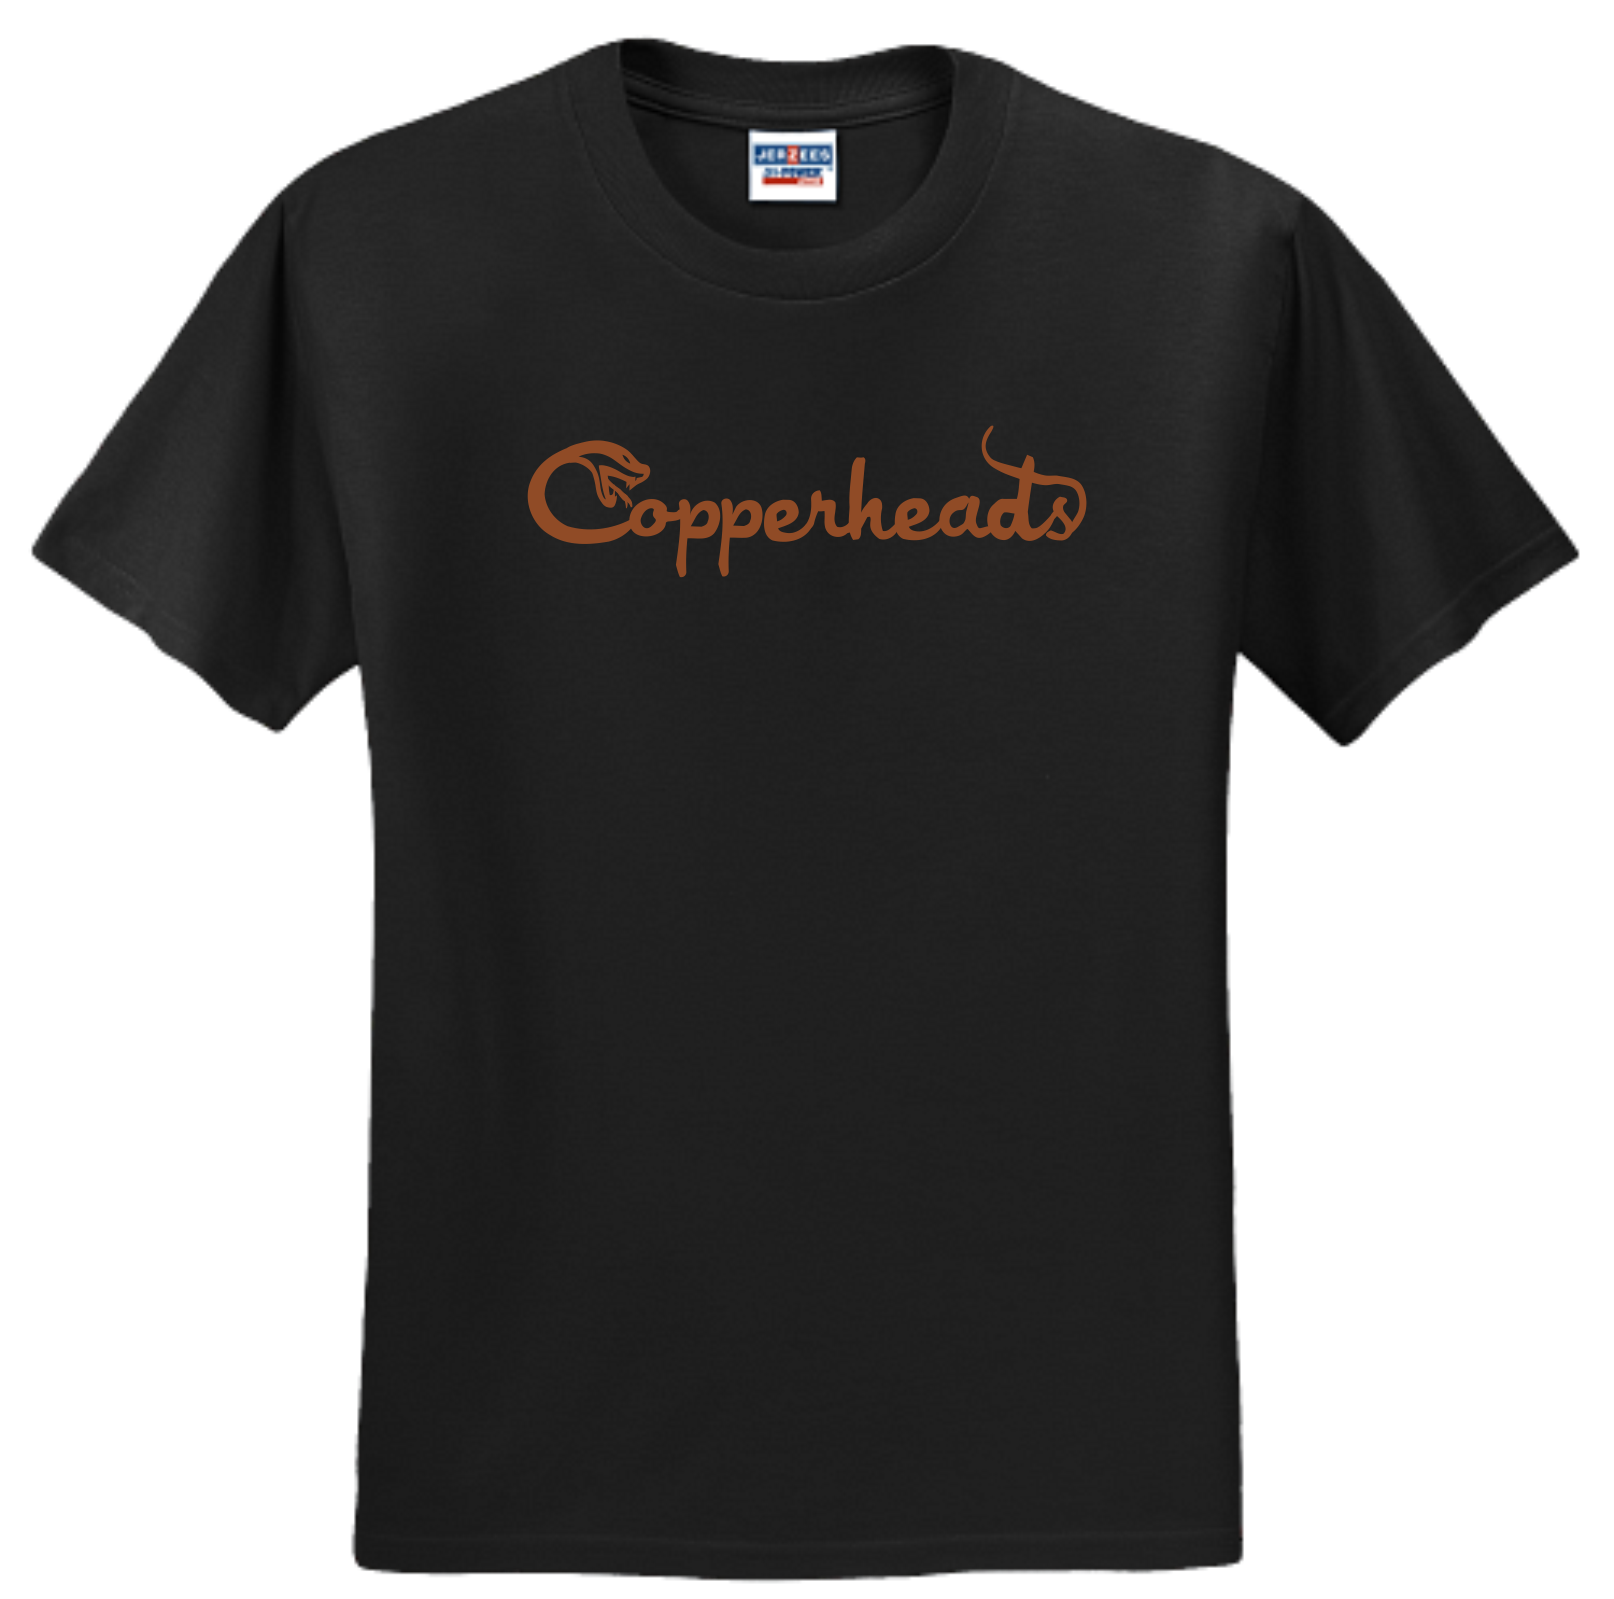 Copperheads Adult T-Shirt with Digital Logo